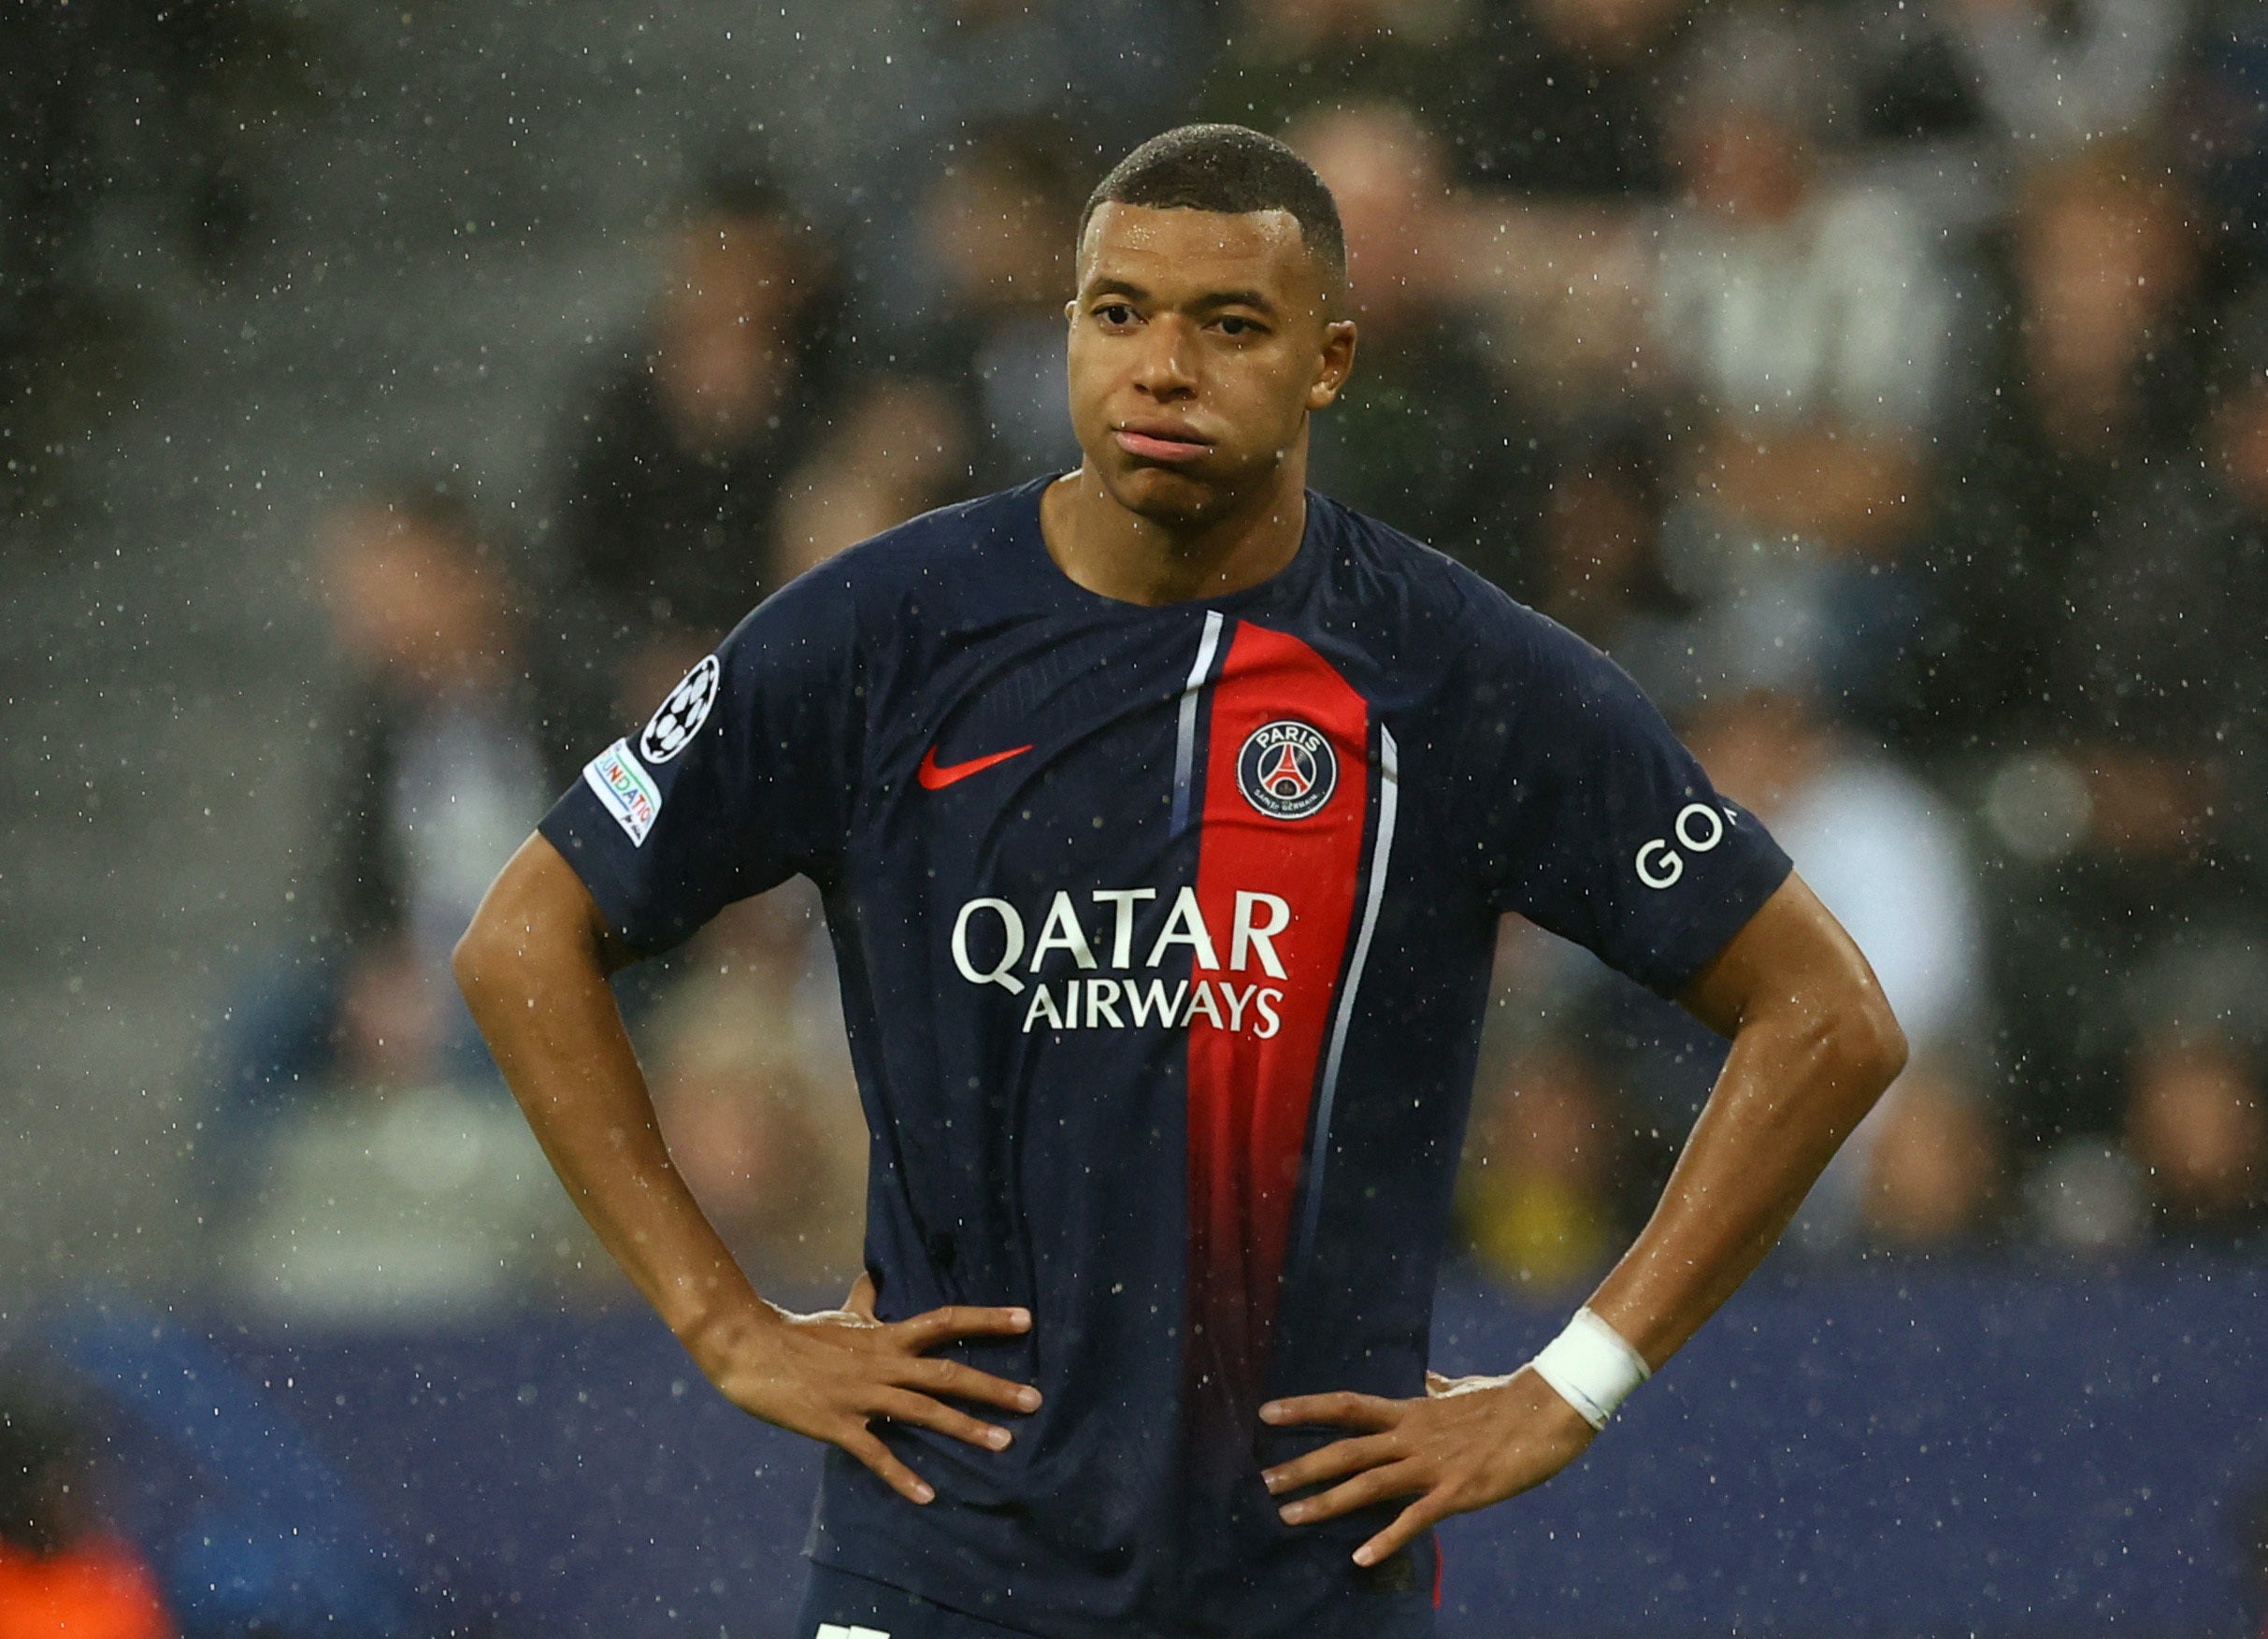 Mbappe and PSG had a night to forget